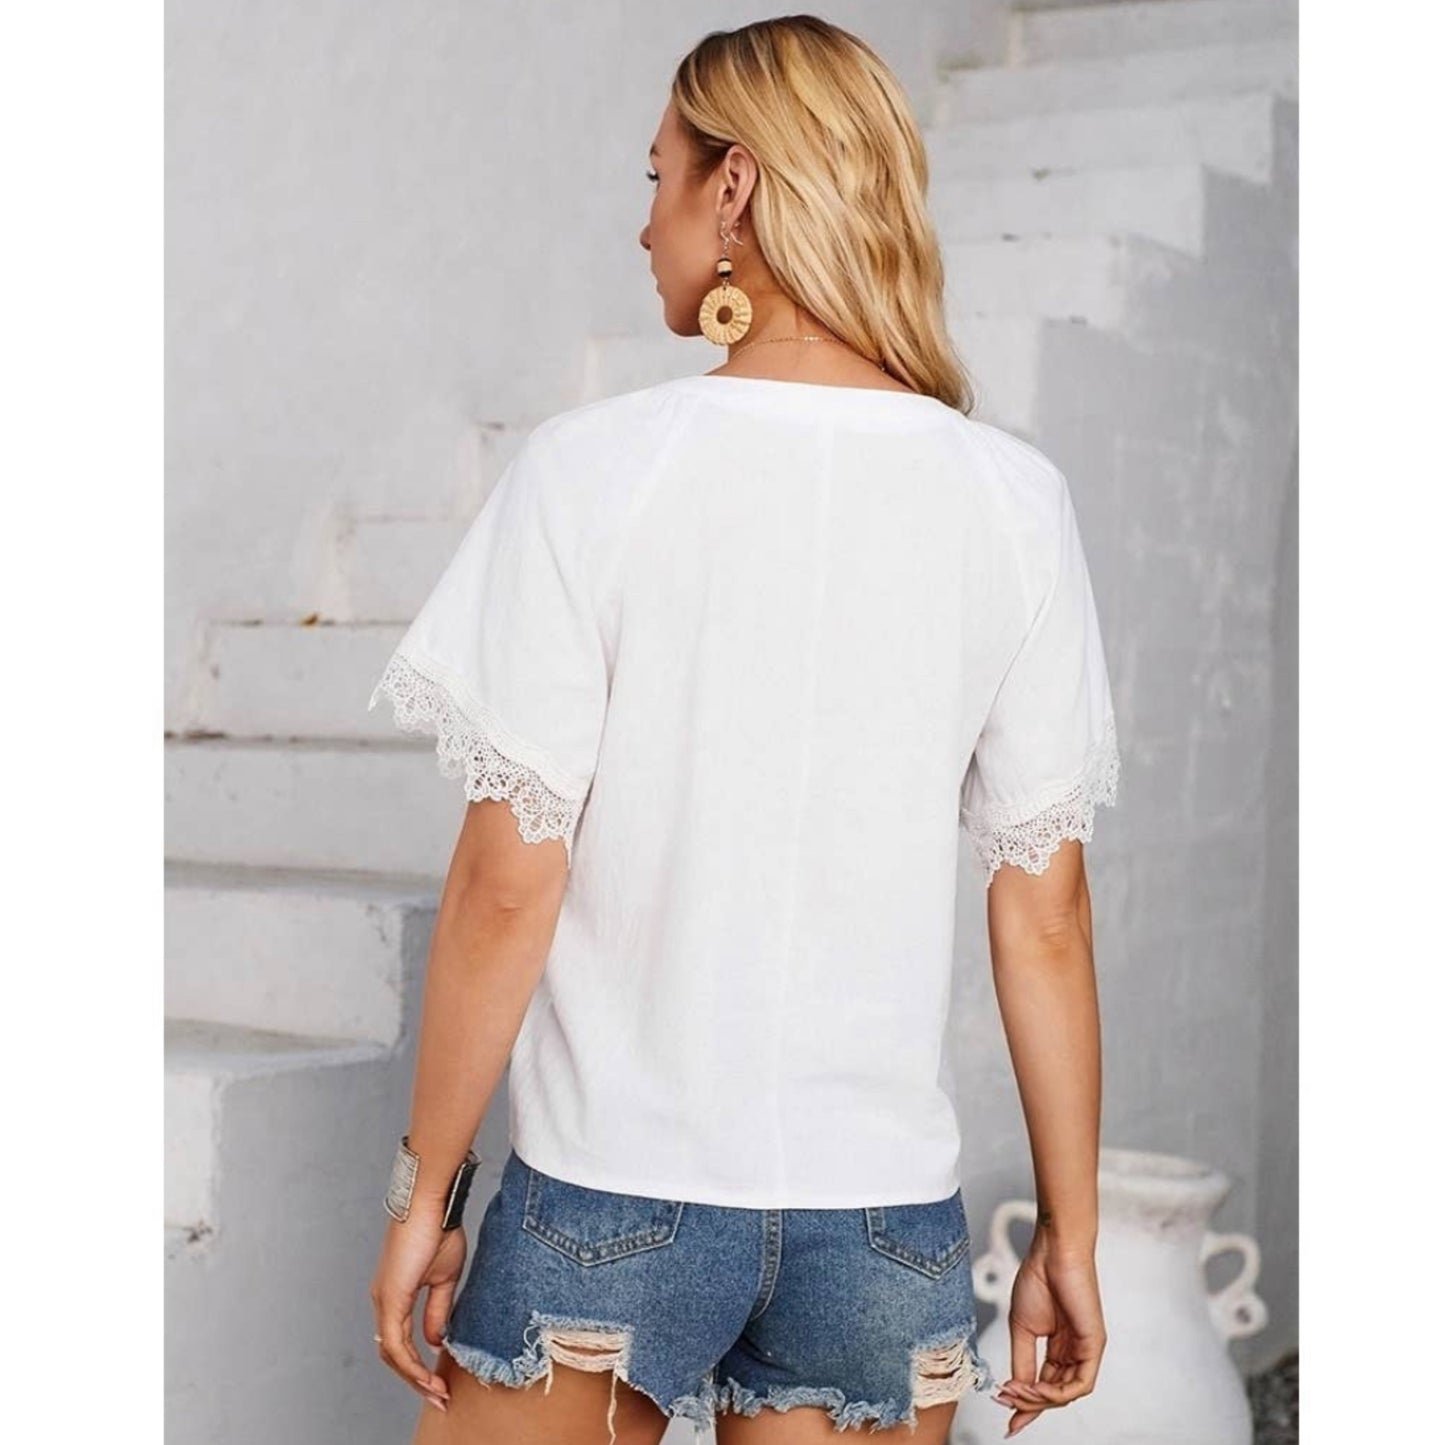 Solid V Neck White Summer Blouse Short Sleeves Lace Trim